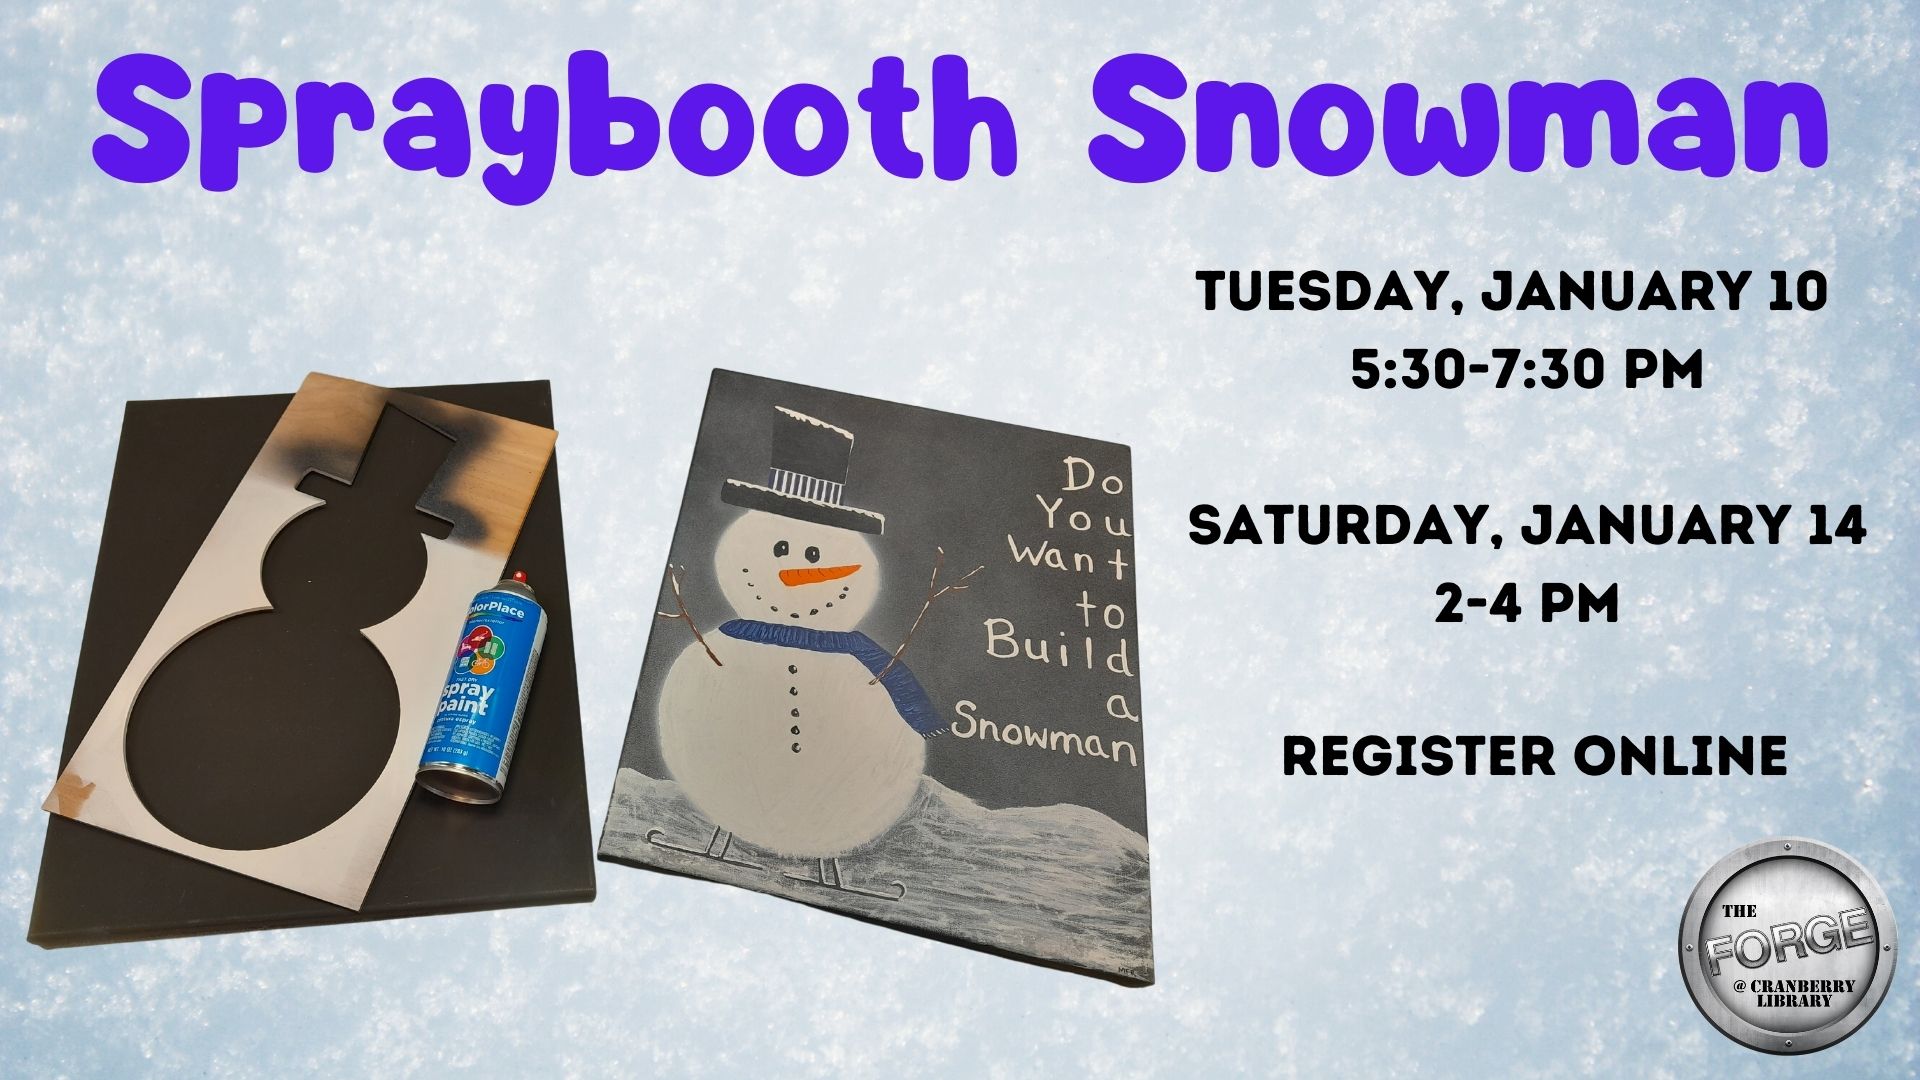 Flyer with a photo of a snowman painting